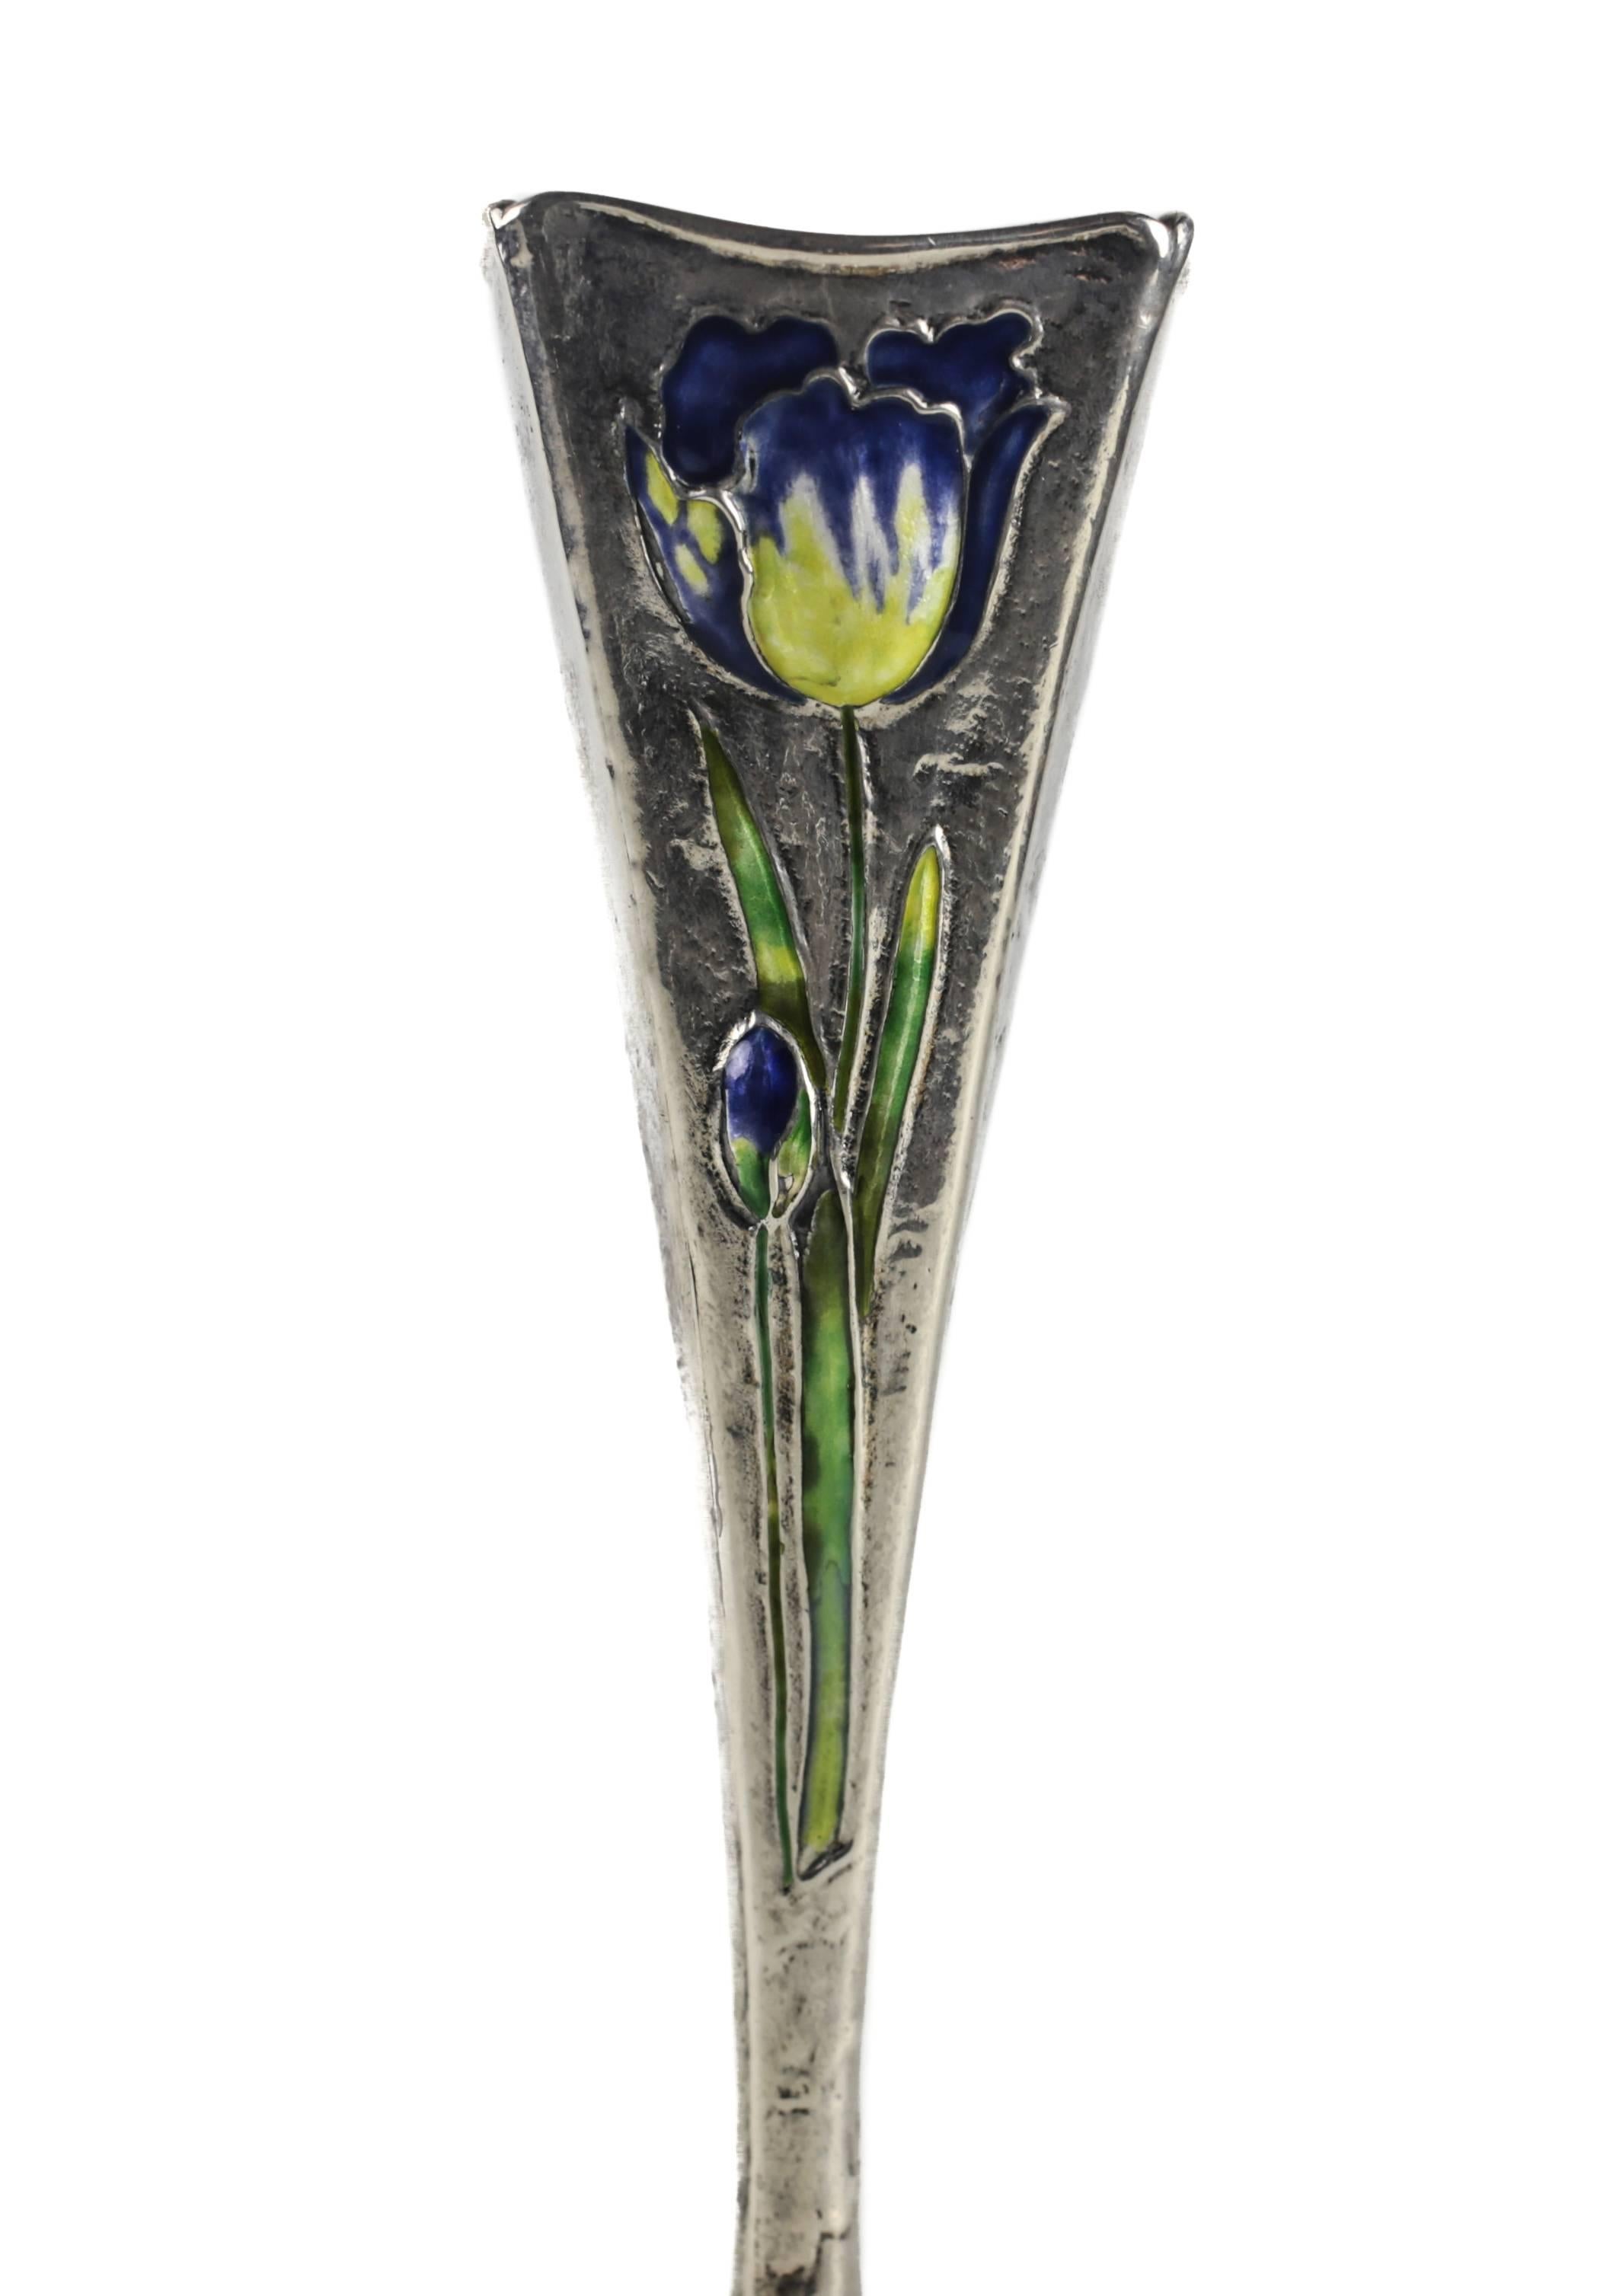 A stunning late 19th century Art Nouveau sterling silver vase with an embossed floral silhouette to two sides, the face with hand applied enamel decoration, a rarely seen technique by Gorham. Three color enamel consisting of green vines with yellow